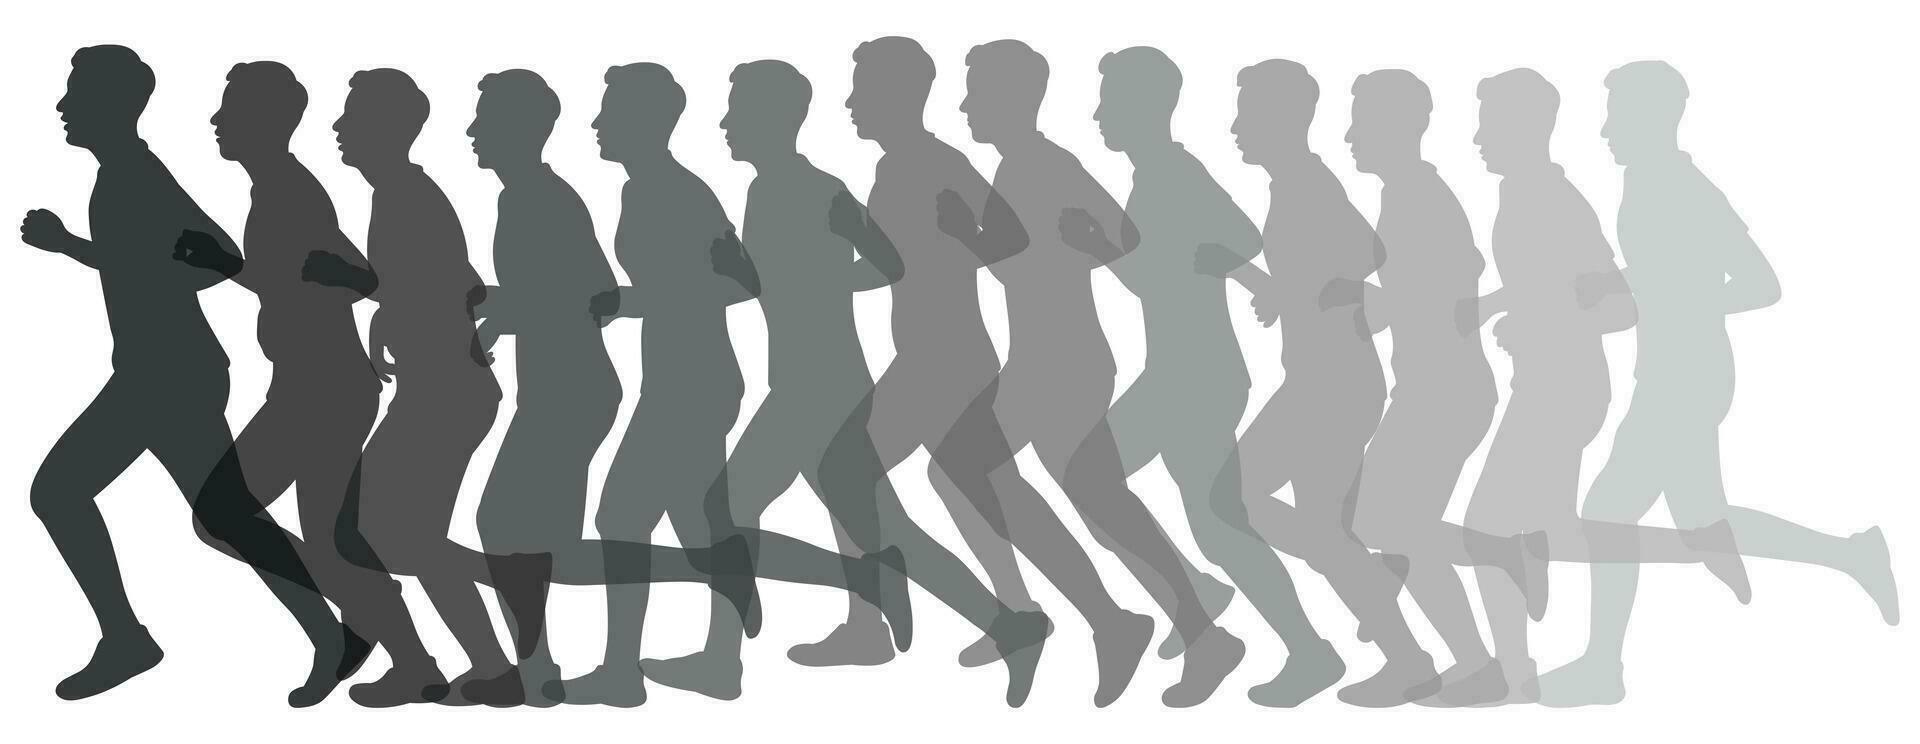 Silhouette of a sports team of athletes runners. Athletics, running, cross, sprinting, jogging, walking vector